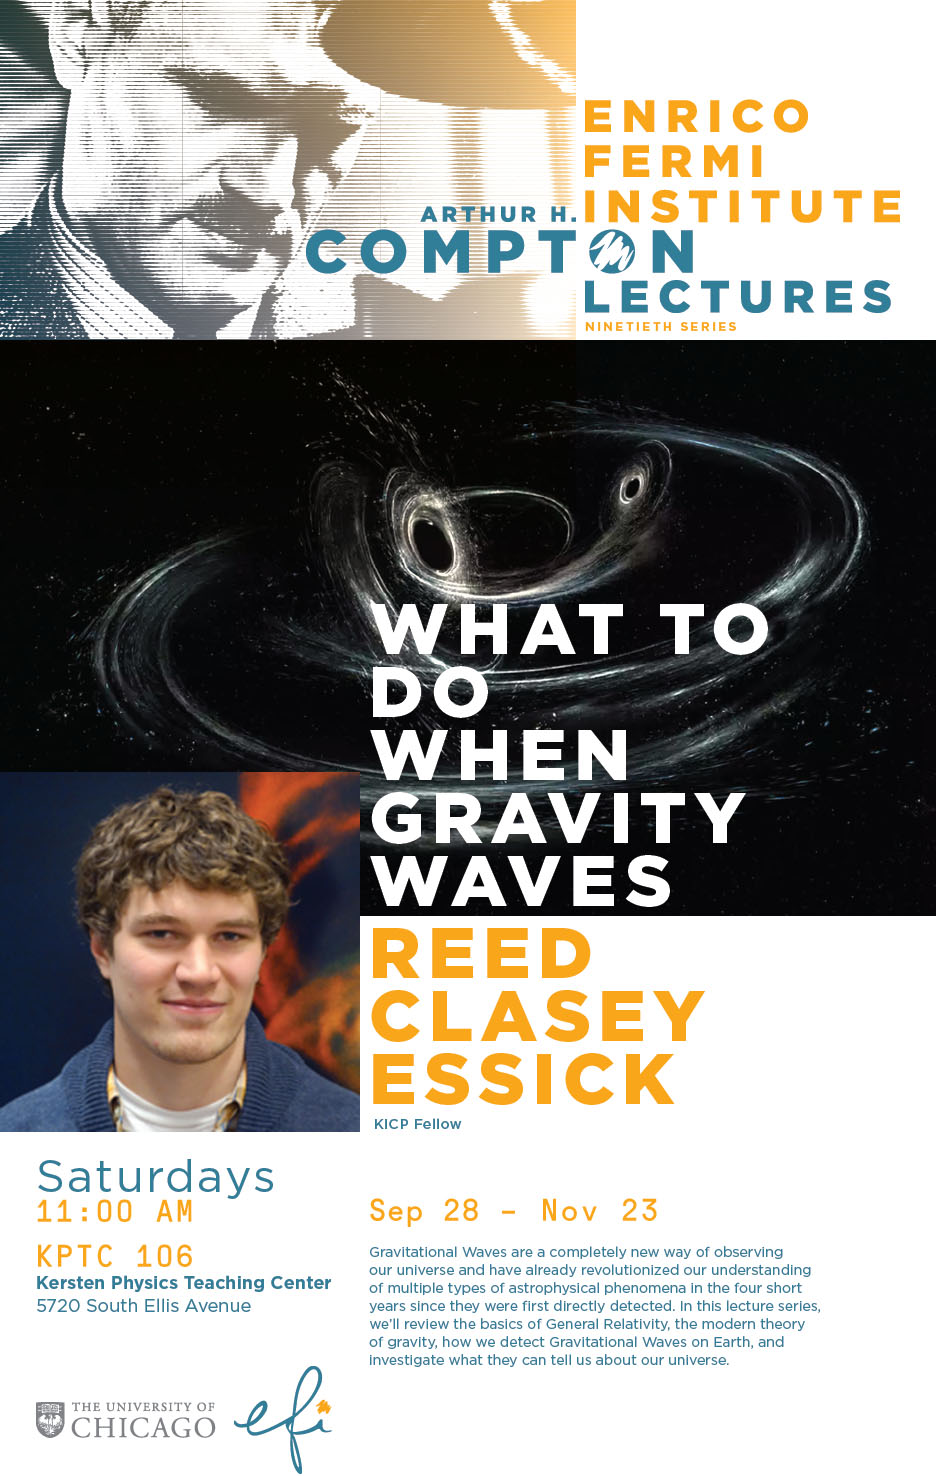 Picture: 90th Compton Lecture: Reed Clasey Essick, What to Do When Gravity Waves